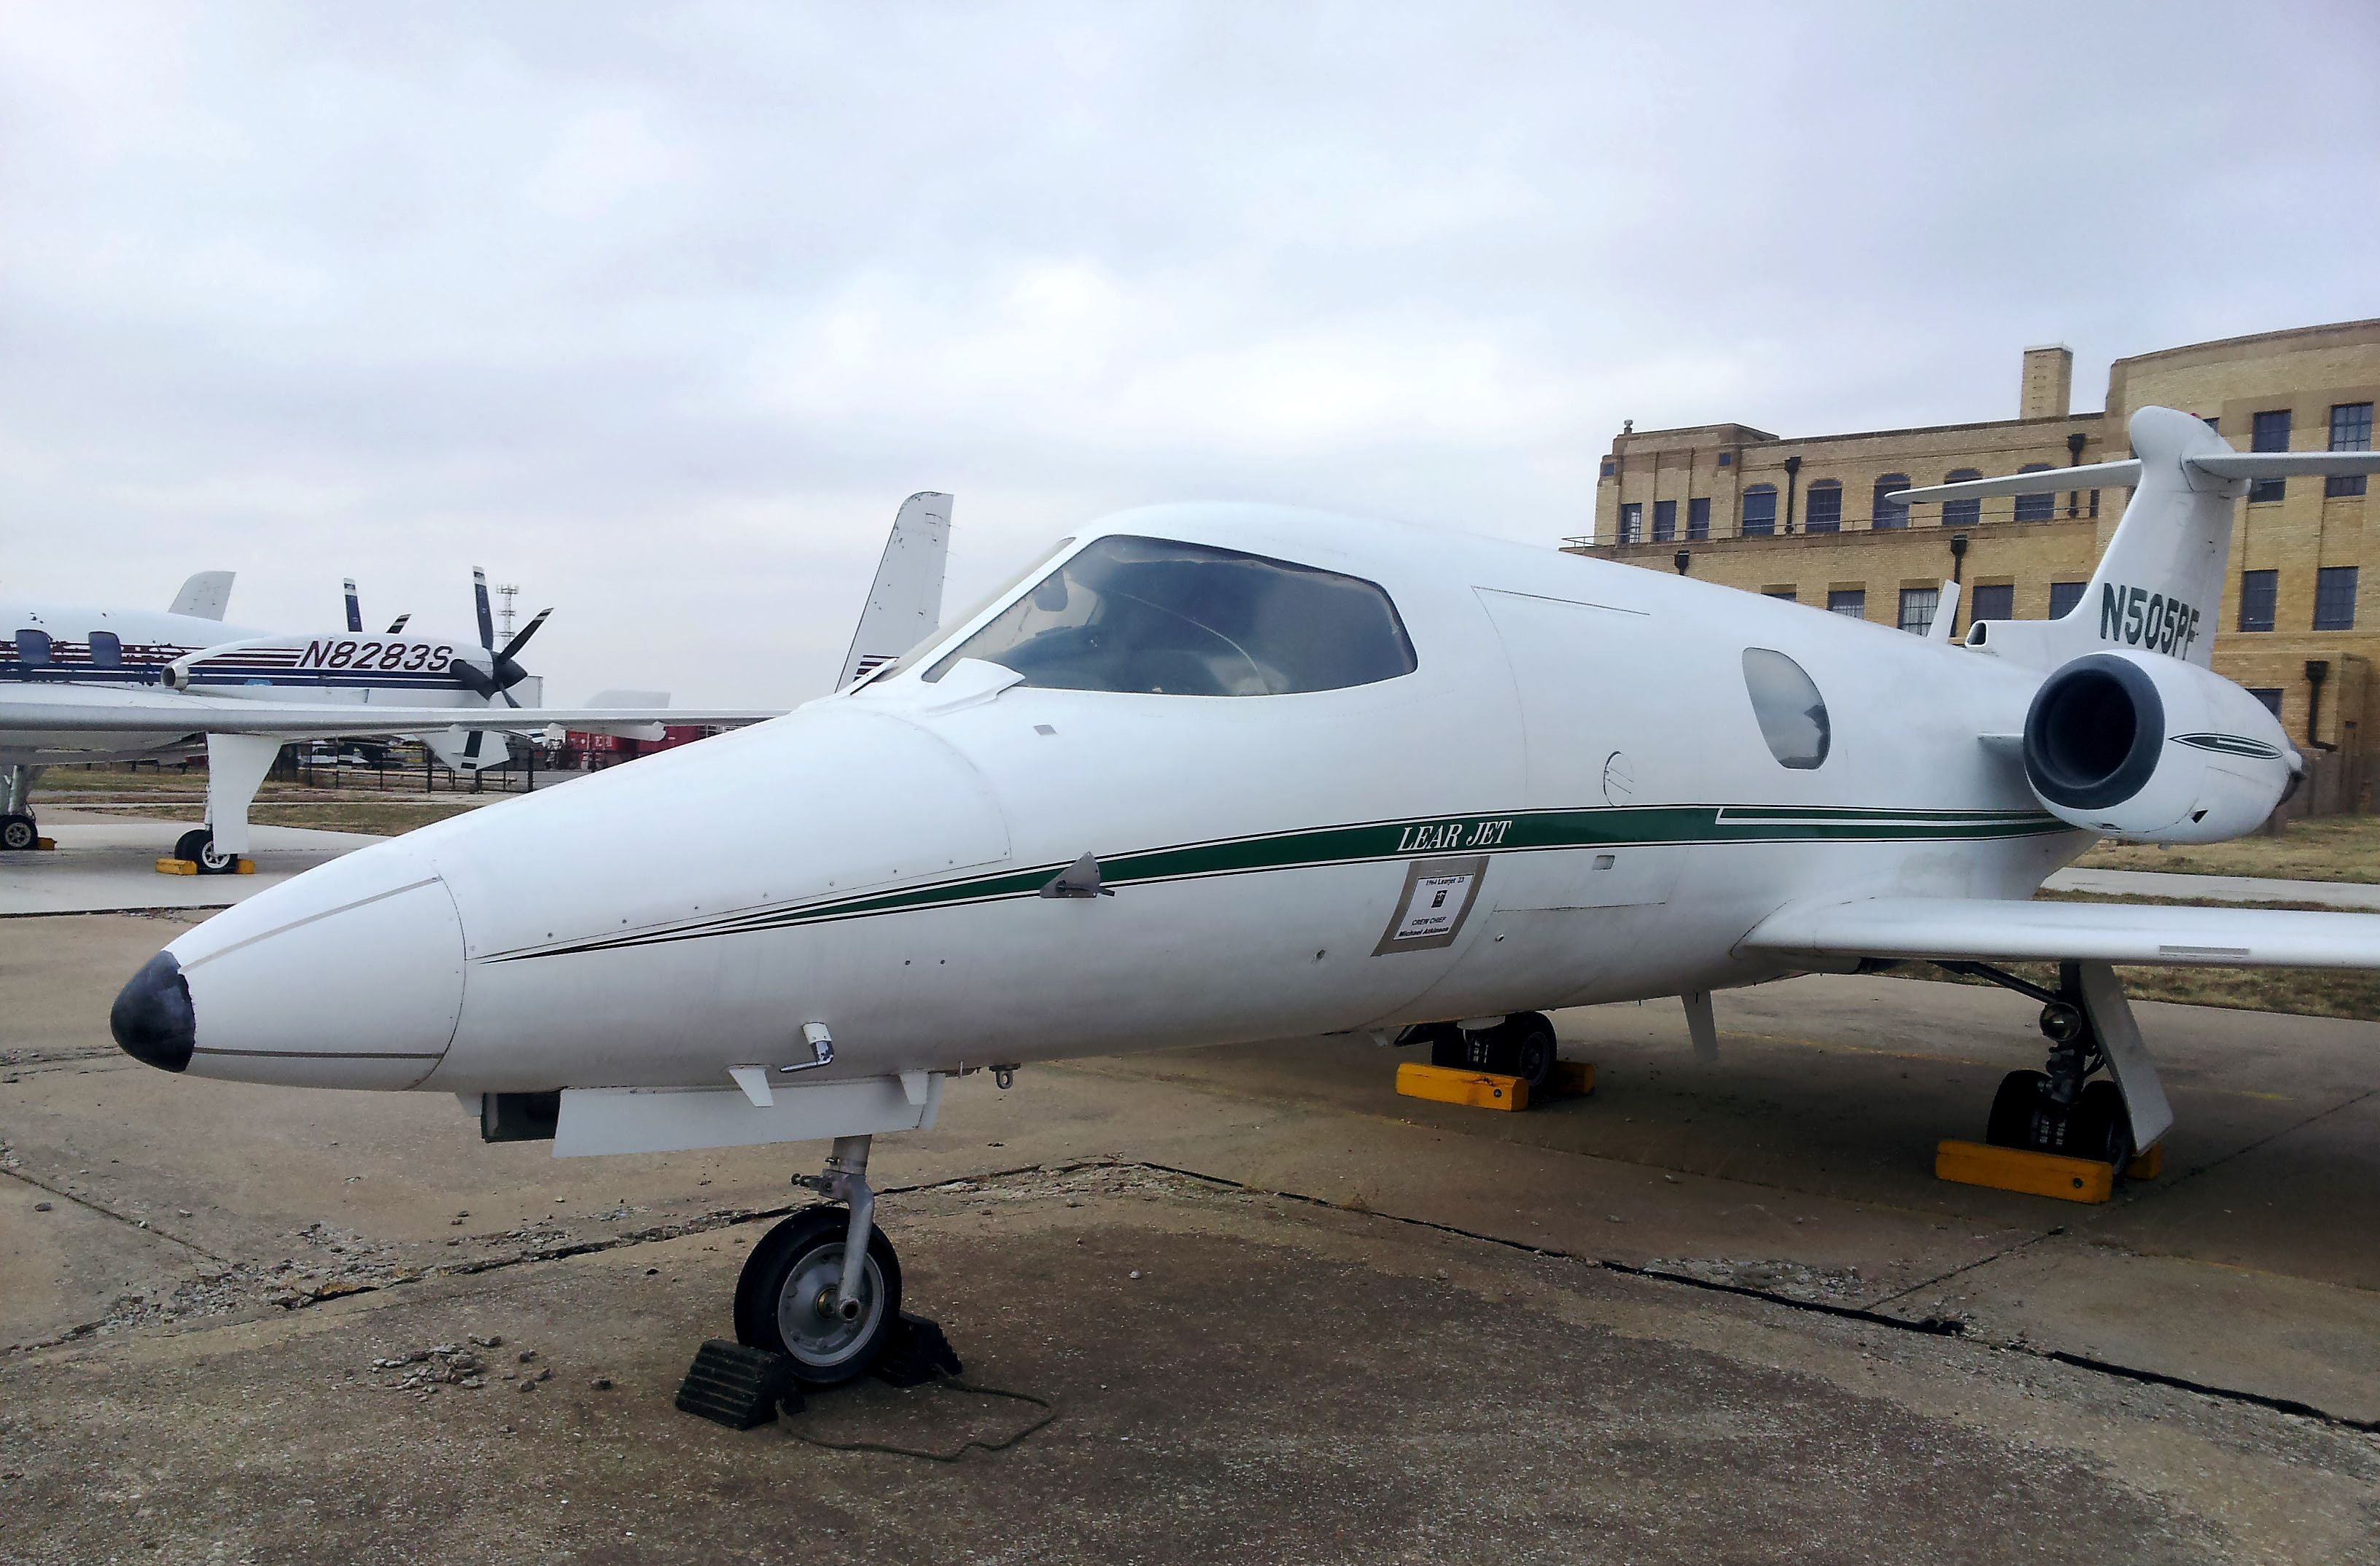 A Learjet 23 parked at an airport.